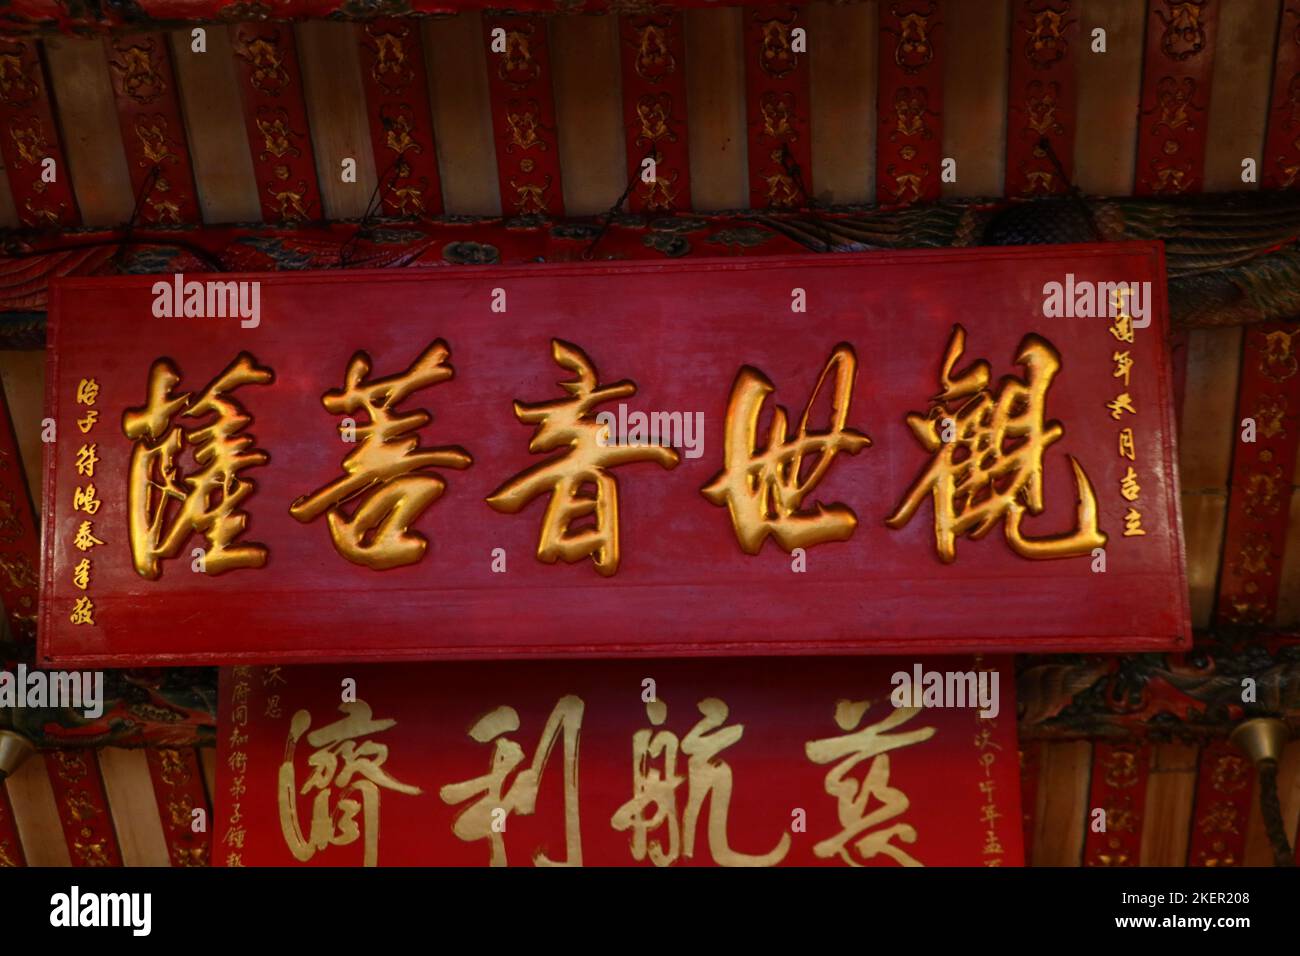 Chinese carved red signboard in old shrine Stock Photo